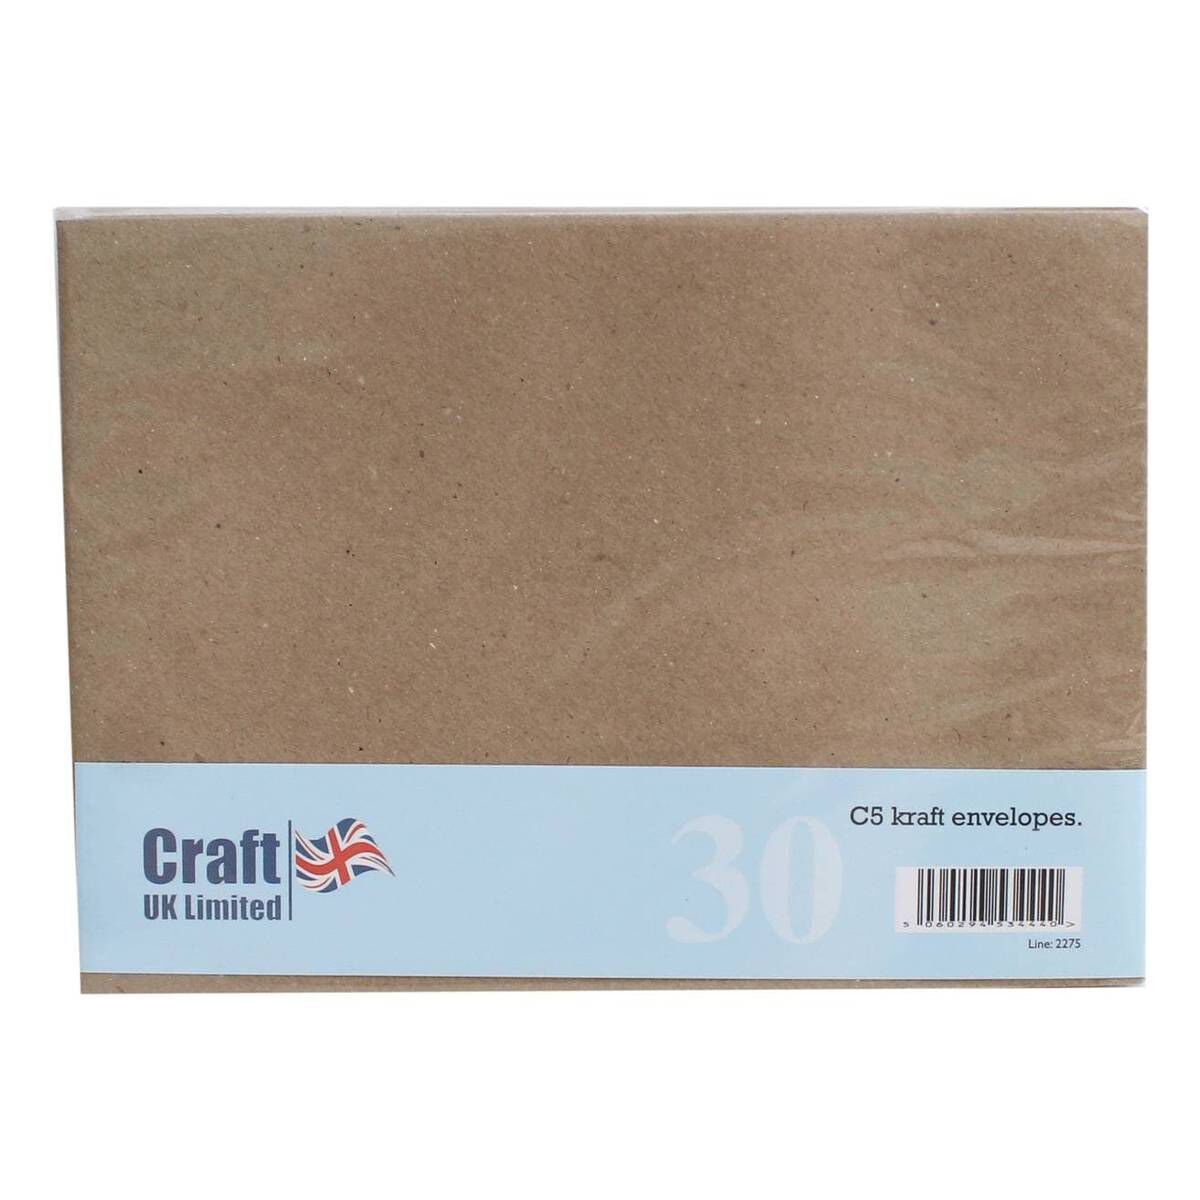 Craft UK 2281-150 C5 envelopes in Assorted colours 